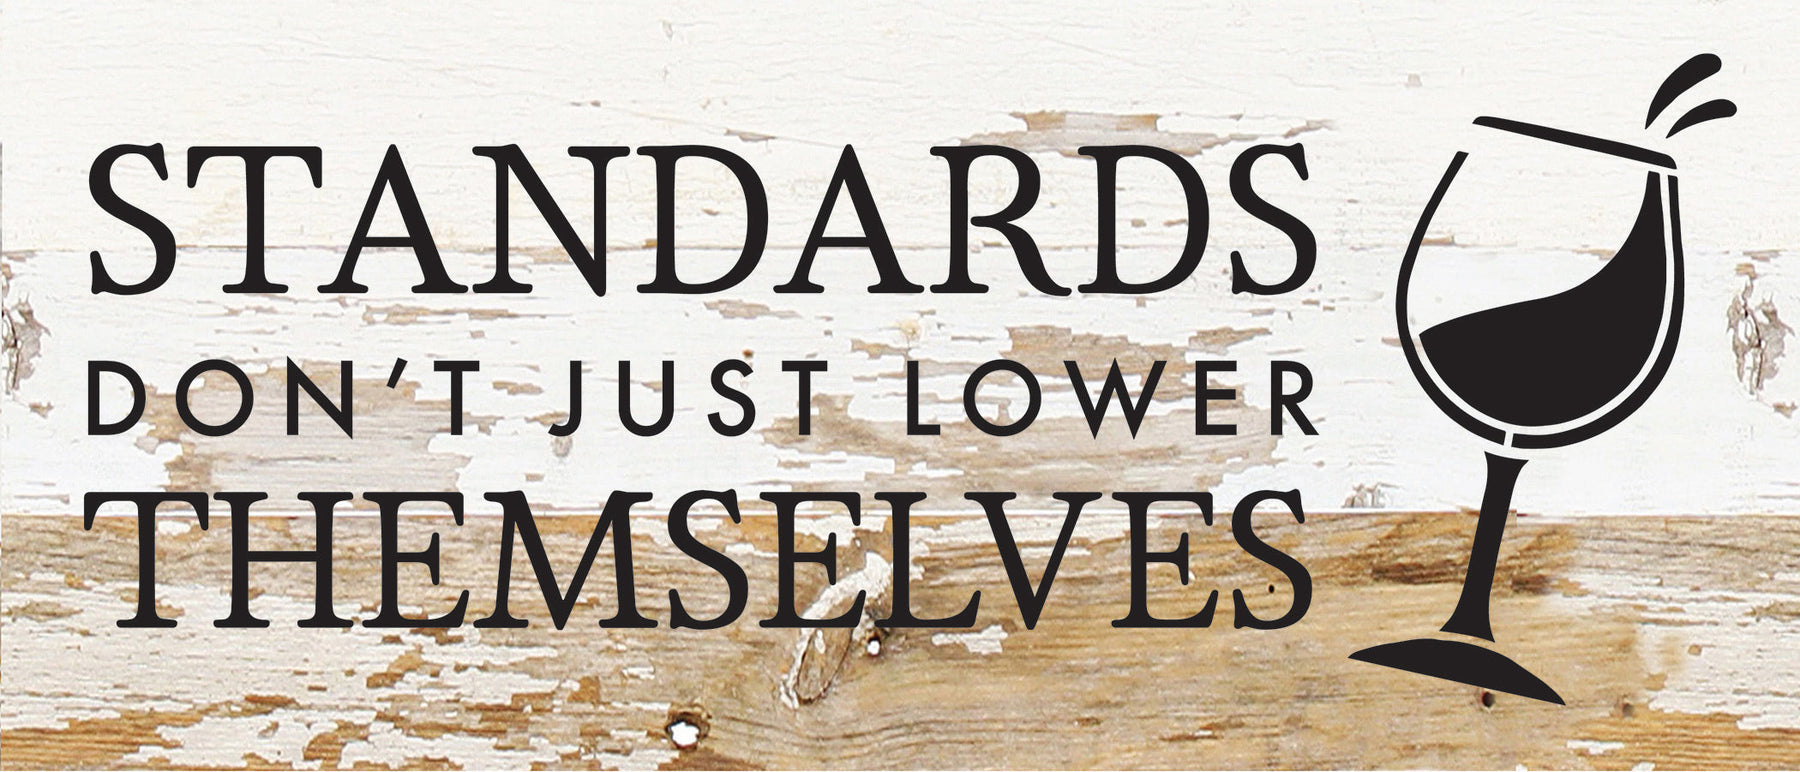 Standards don't just lower themselves (wine icon) / 14x6 Reclaimed Wood Sign